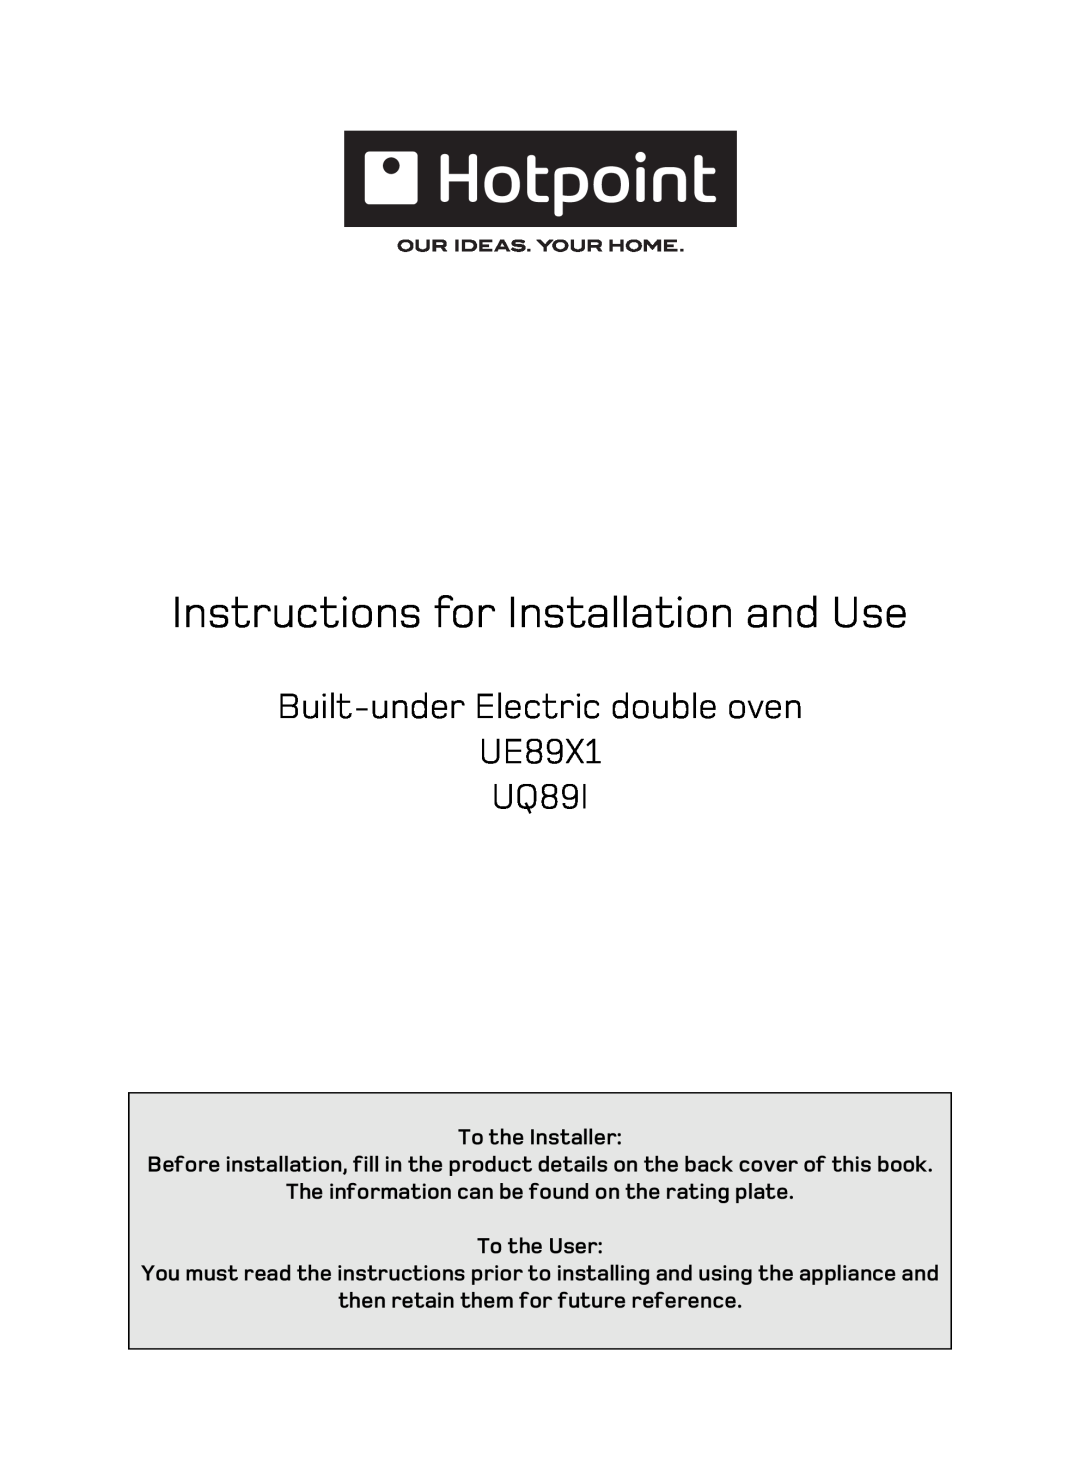 Hotpoint manual Instructions for Installation and Use, Built-underElectric double oven UE89X1 UQ89I, To the Installer 